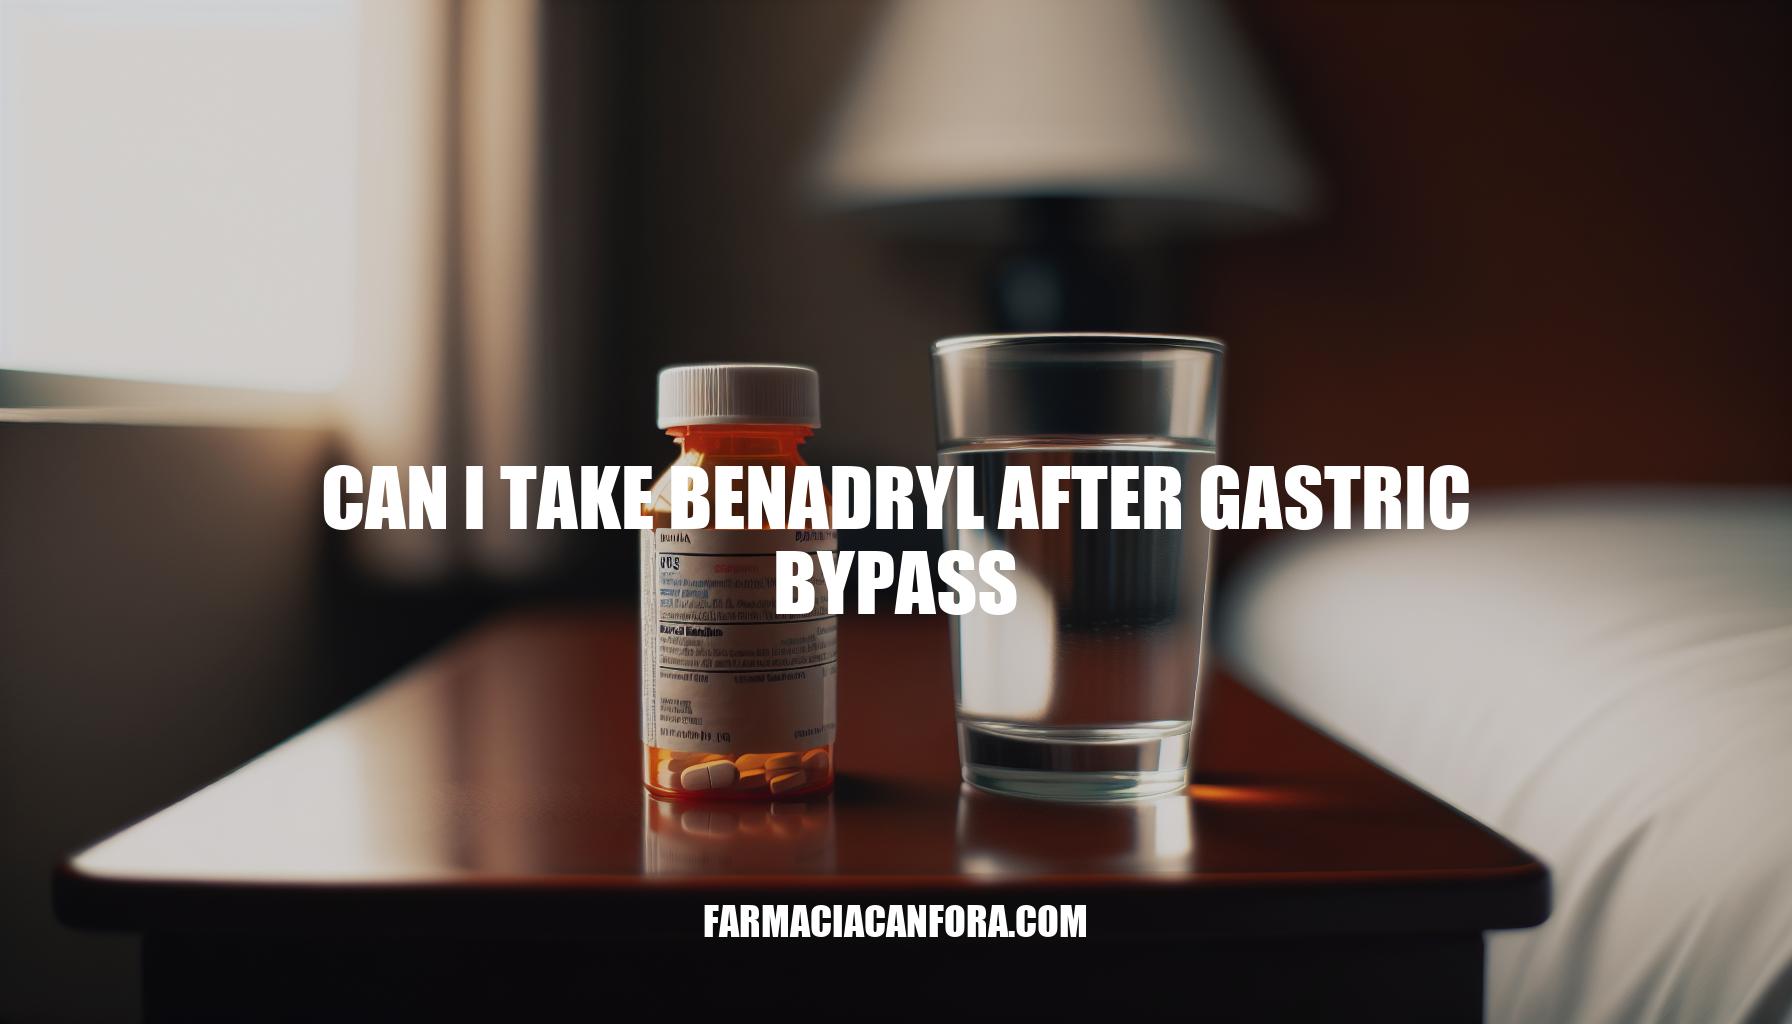 Can I Take Benadryl After Gastric Bypass: Important Considerations